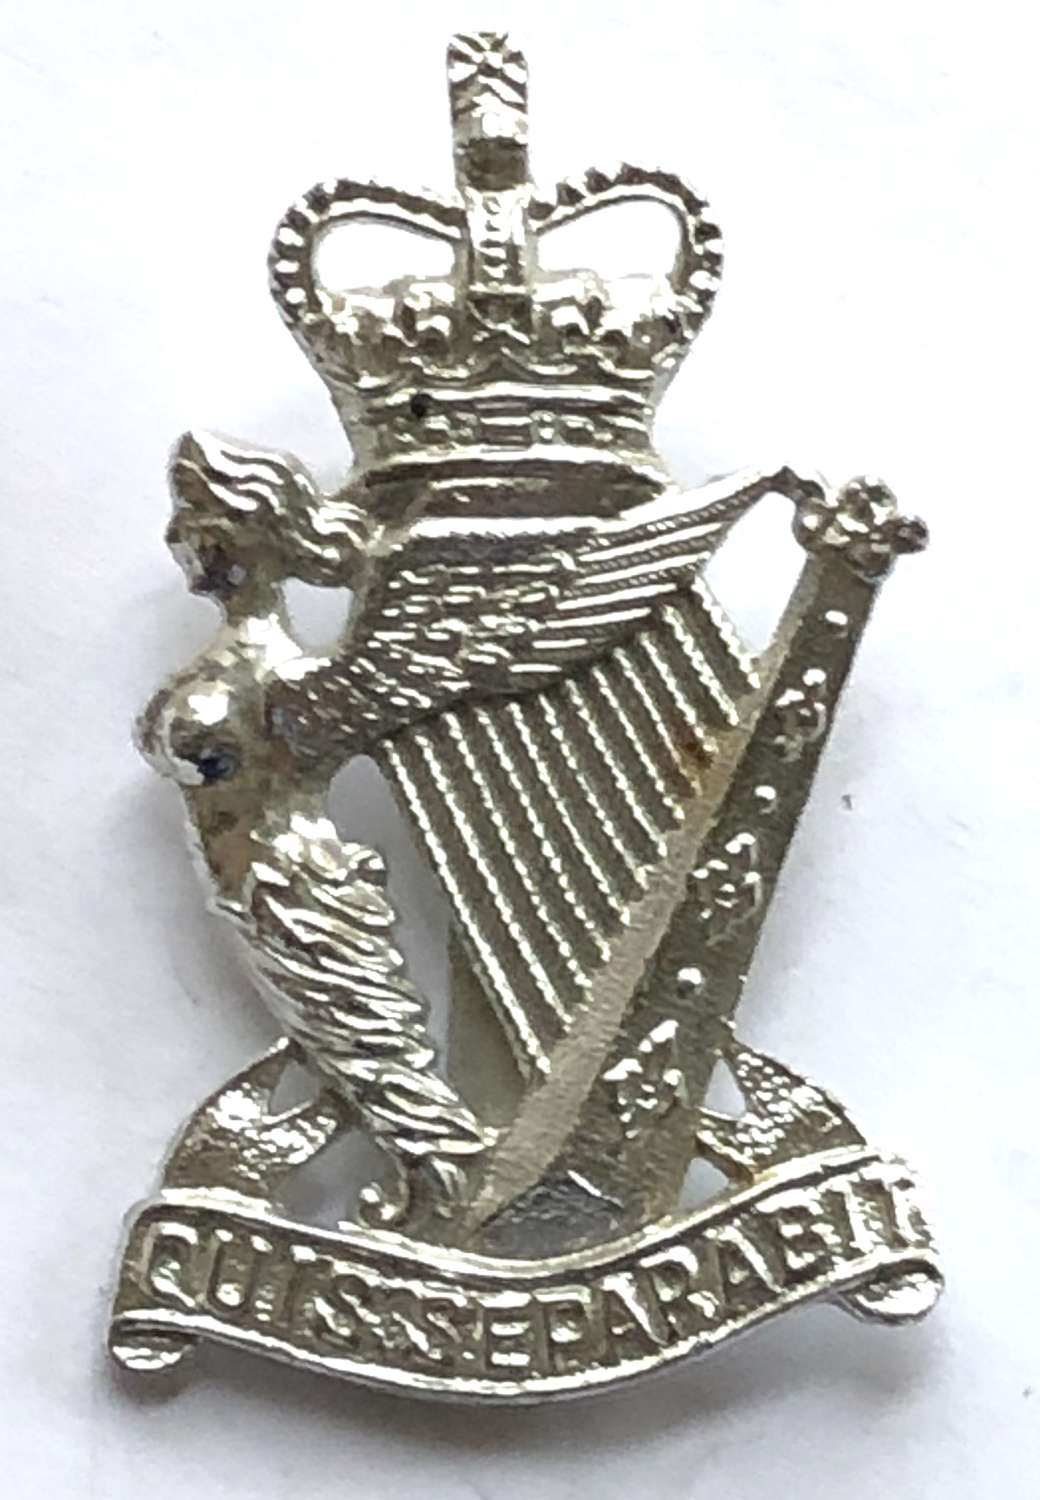 Royal Ulster Rifles anodised early 1950's cap badge by Smith & Wright